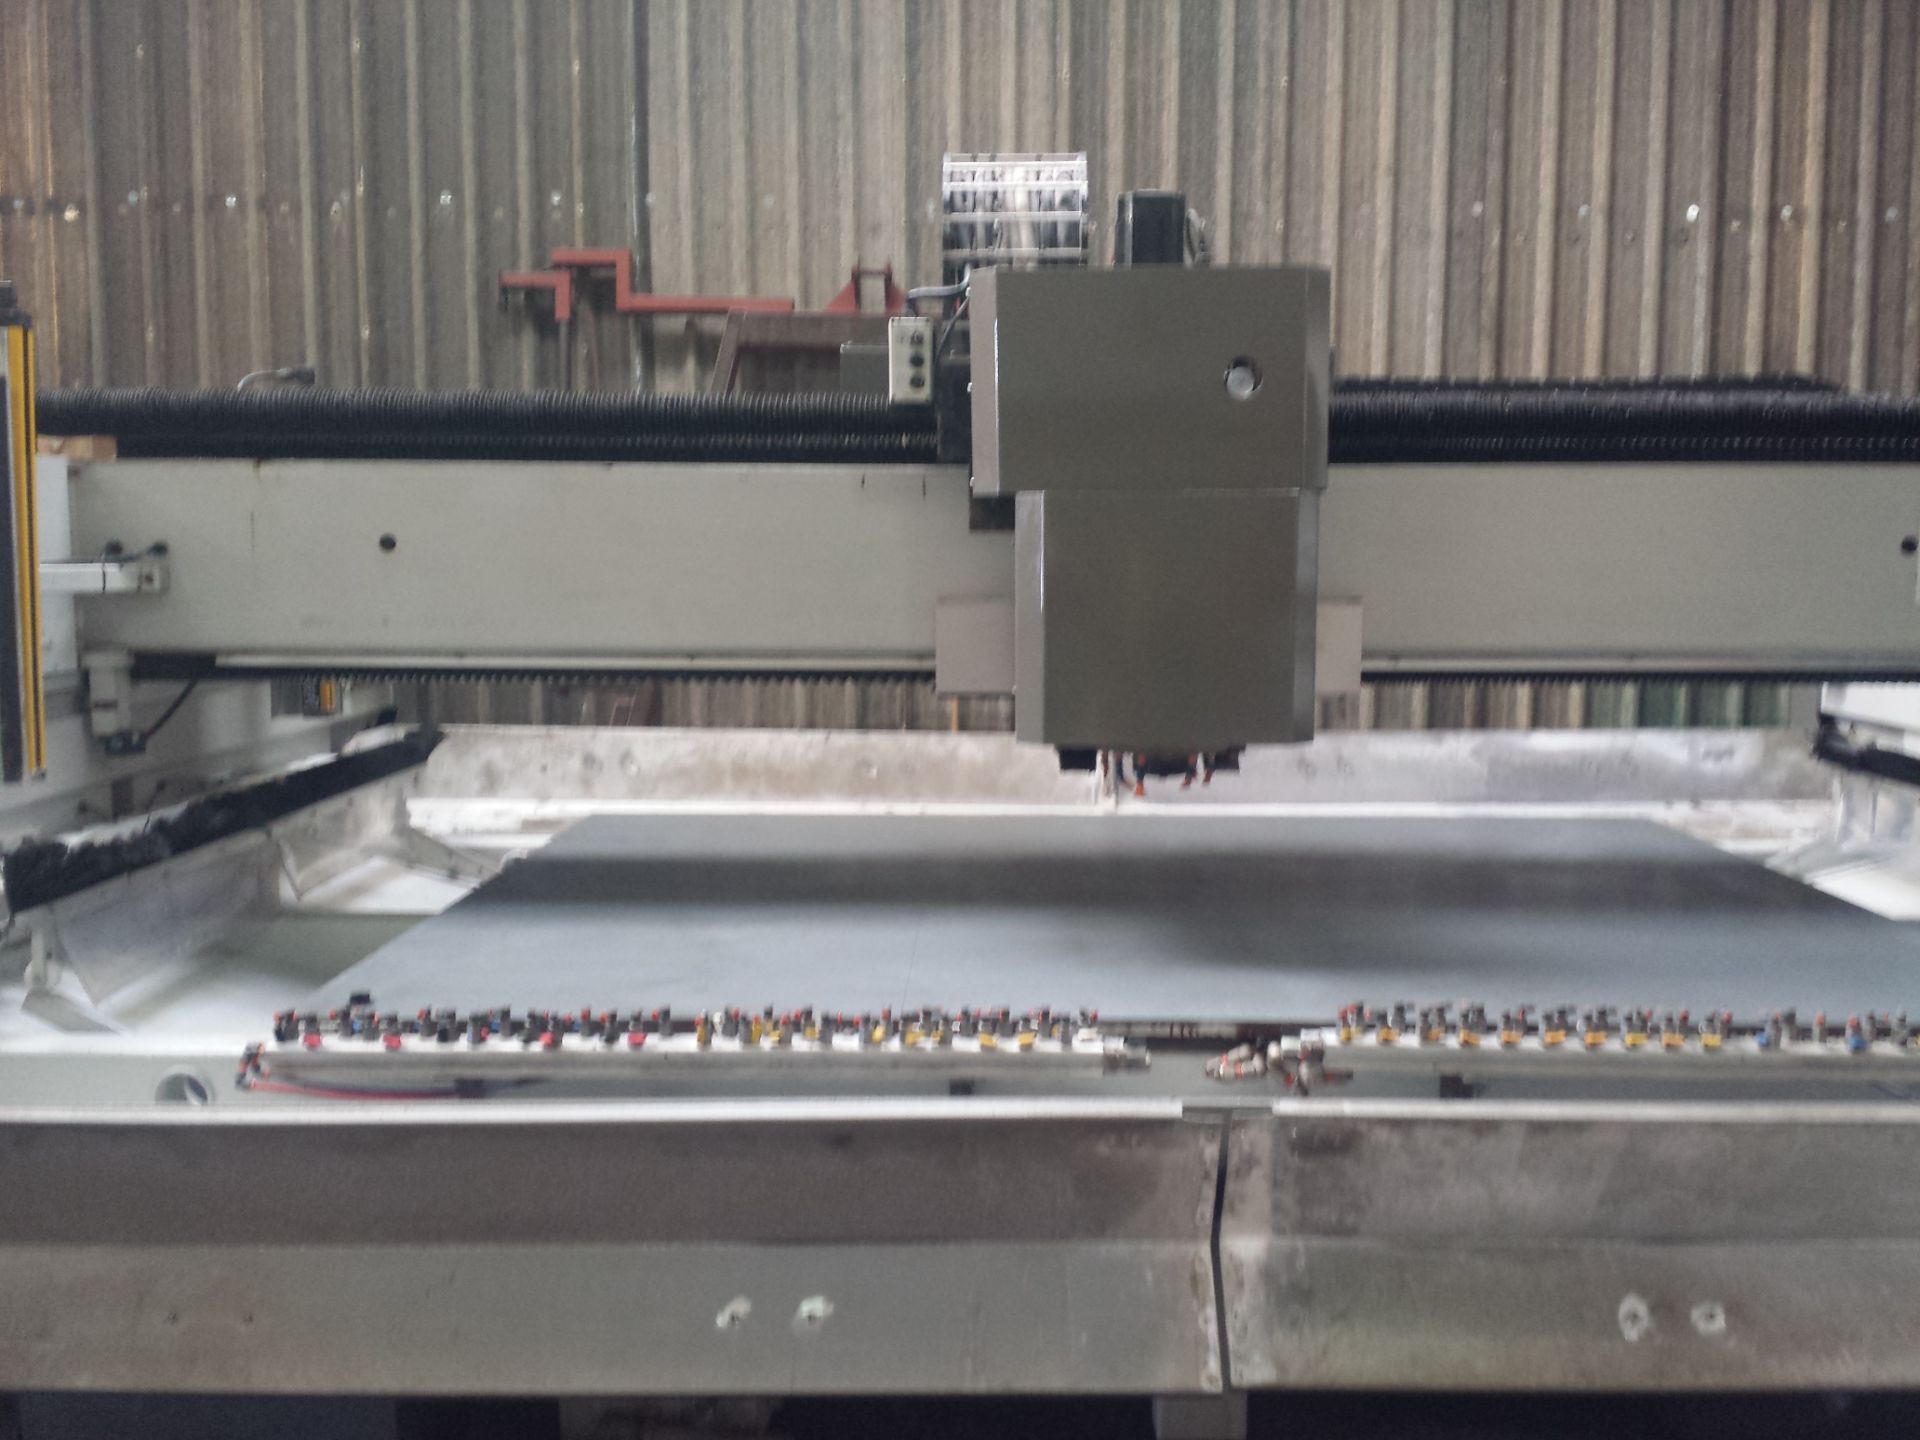 Intermac Master Edge 2300 CNC Edging Machine 3000 x 2300 Bed Size with S10 Numerical Control Unit, - Image 2 of 4